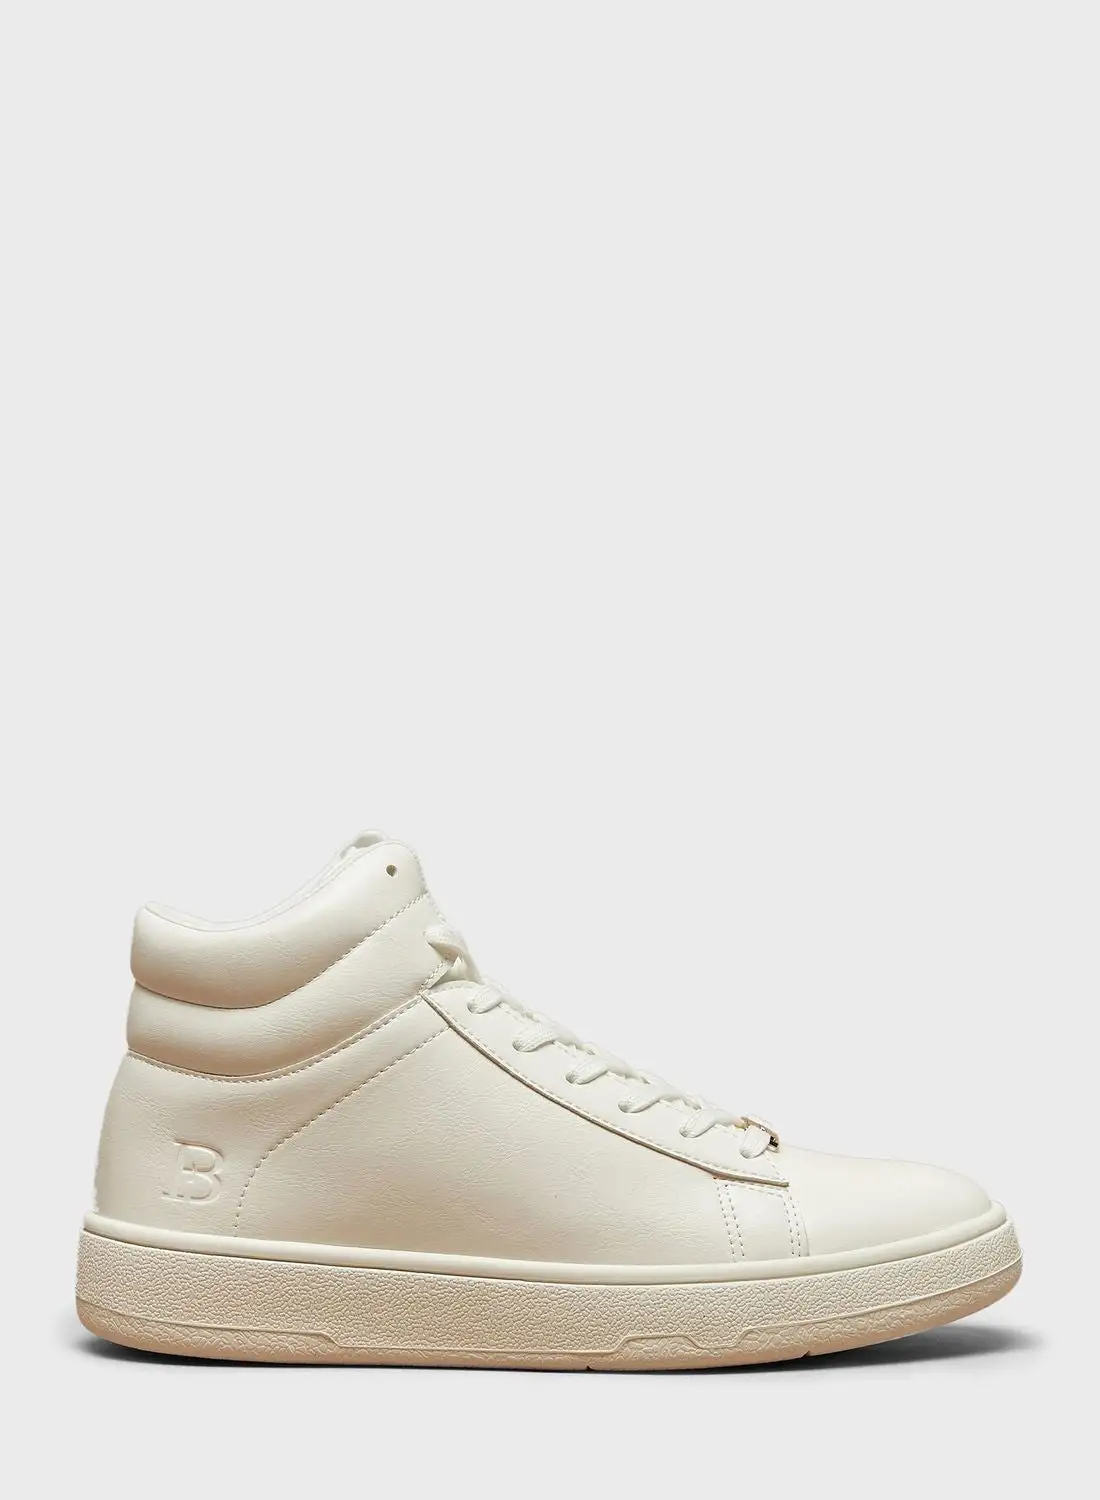 shoexpress Lace Up High Top Sneakers